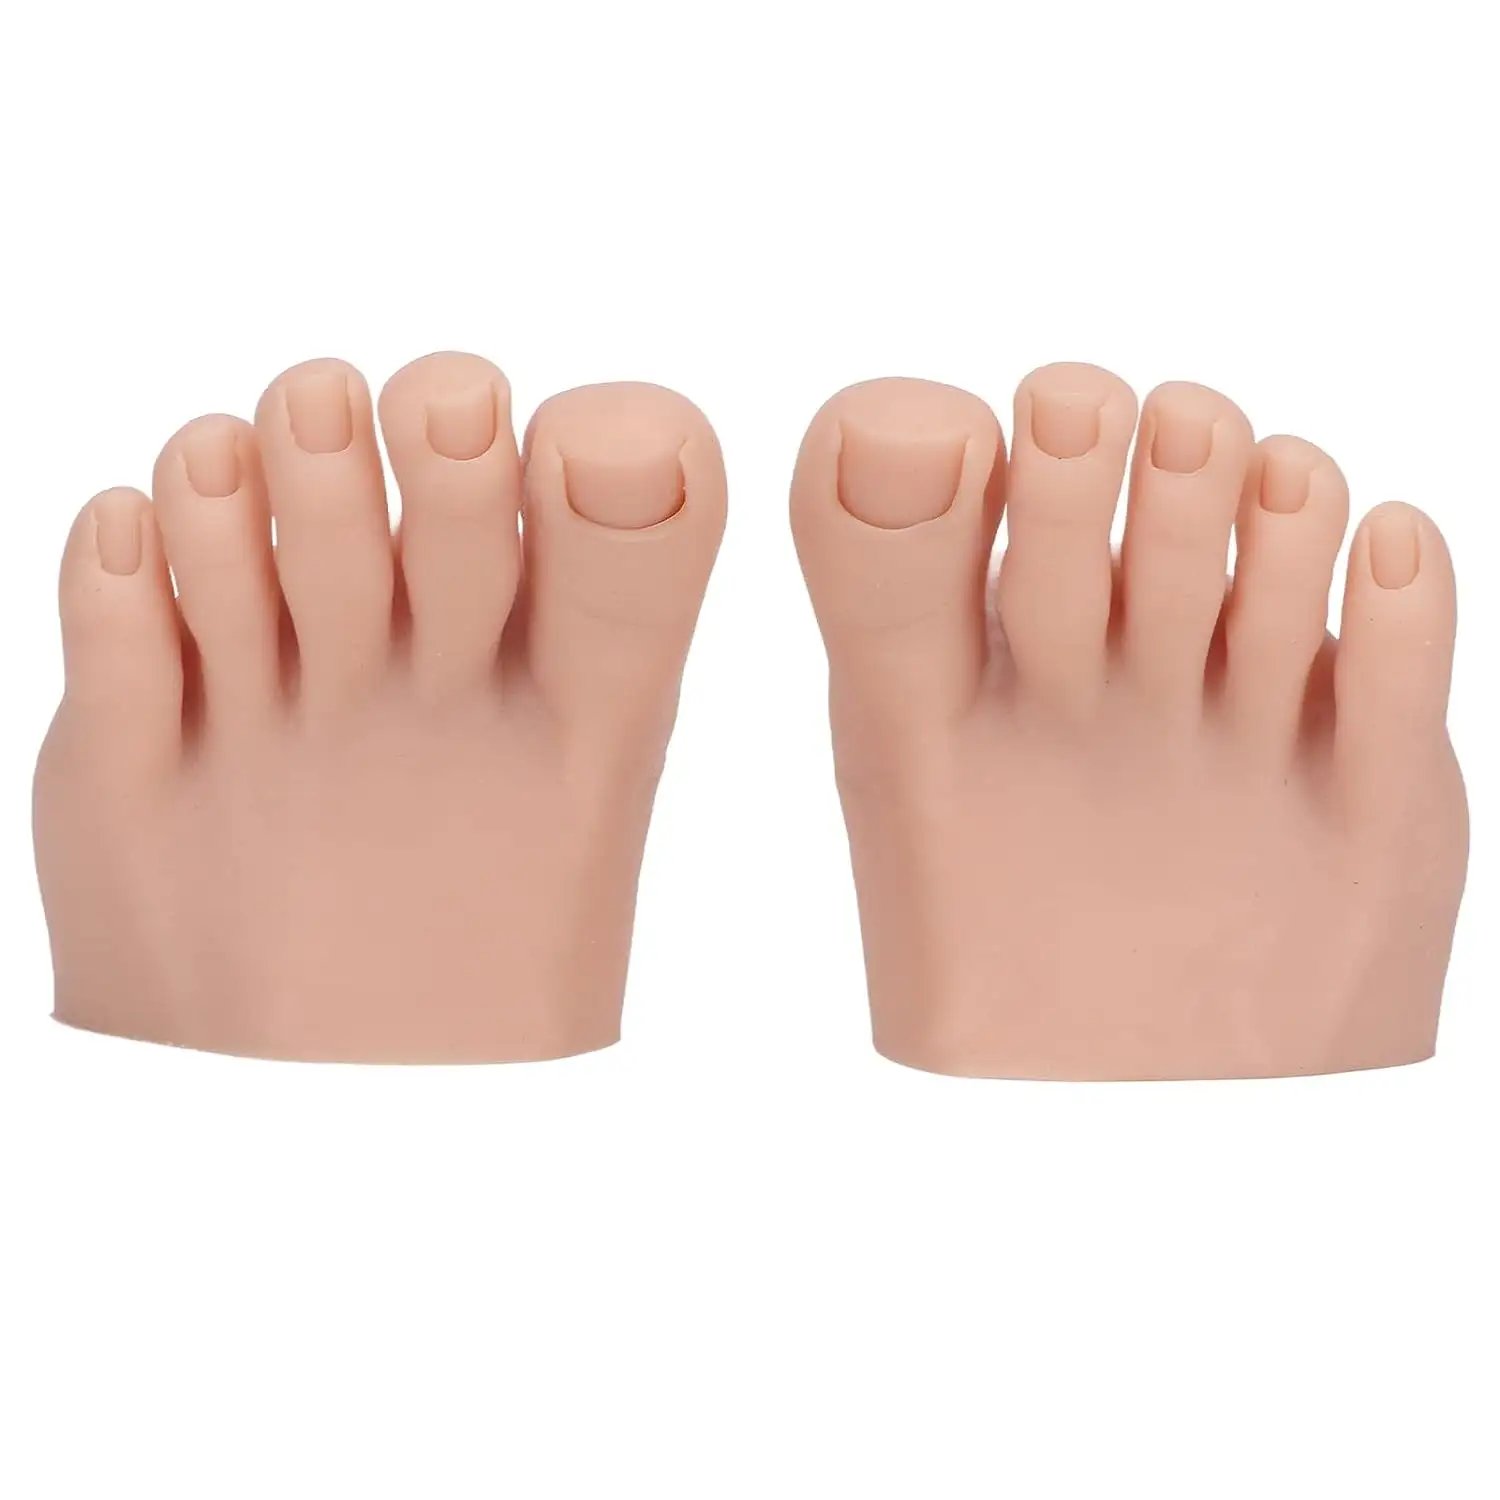 Practice False Foot Model Set Rubber Foot Silicone Body Parts Soft Silicone Nail Art Training Display